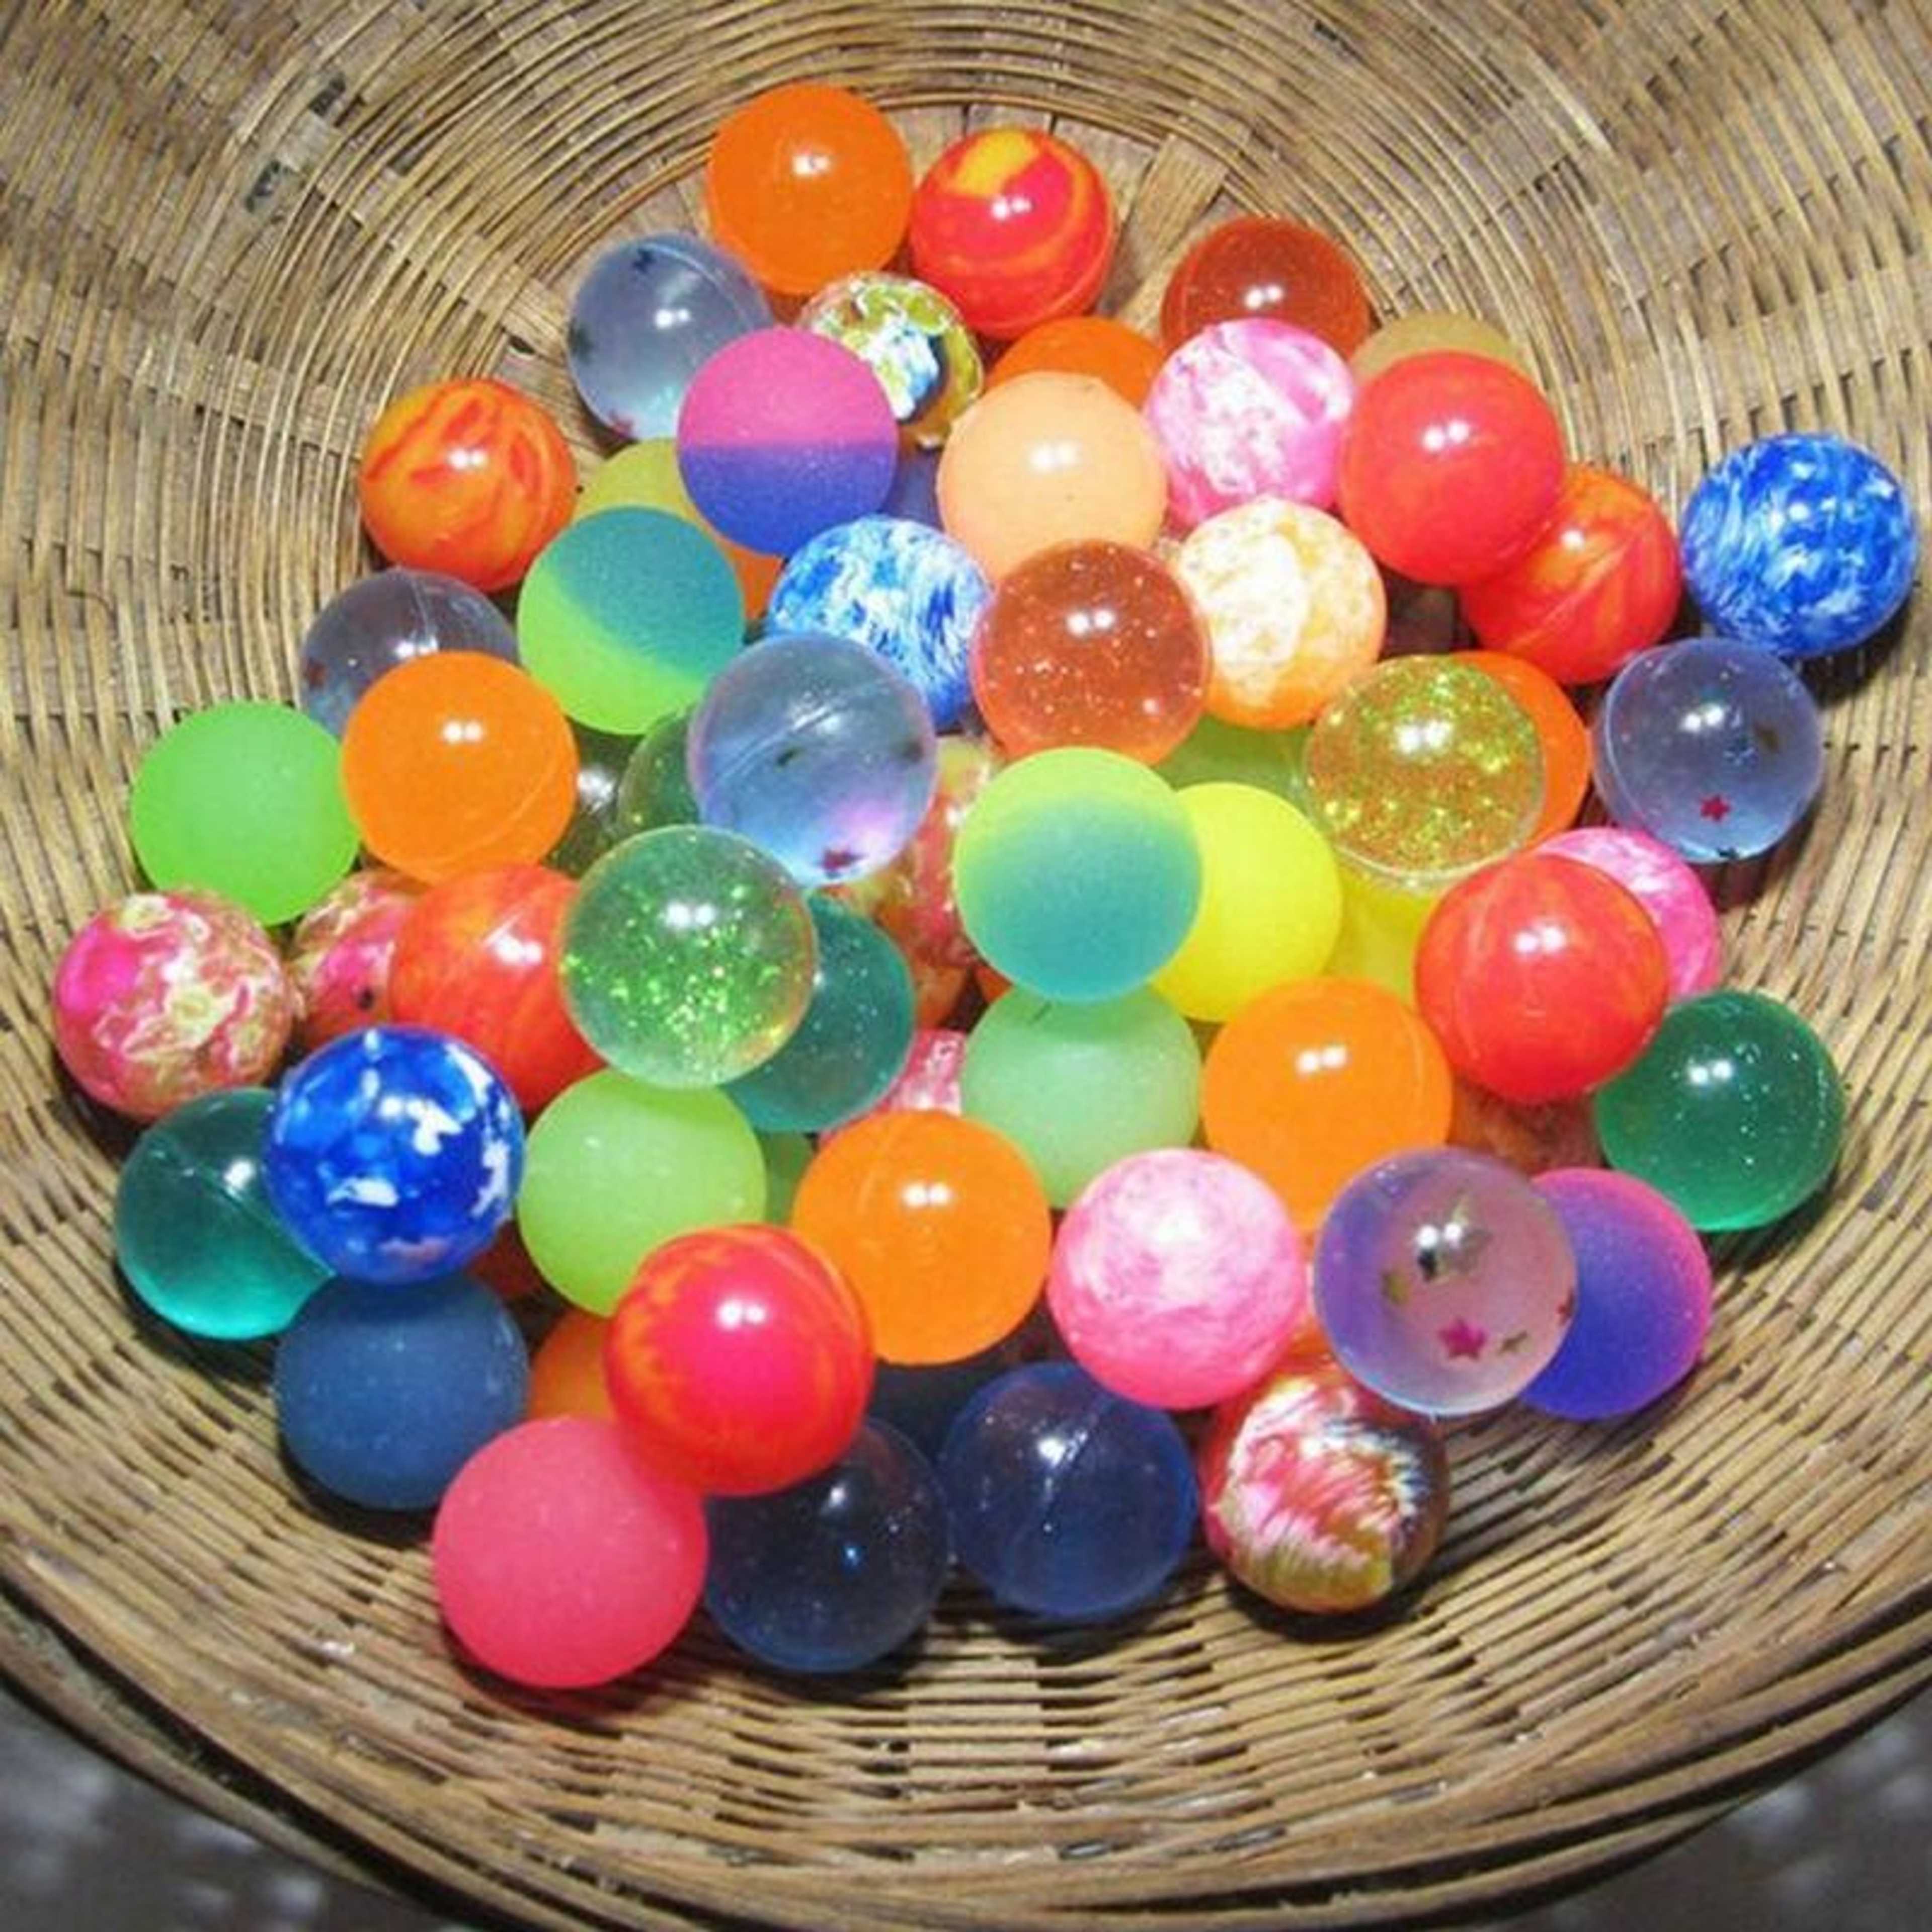 Pack of 10- Bouncing balls, bouncy ball, bounce ball, picture bouncing ball for kids Decompression Toys Amusement Toys